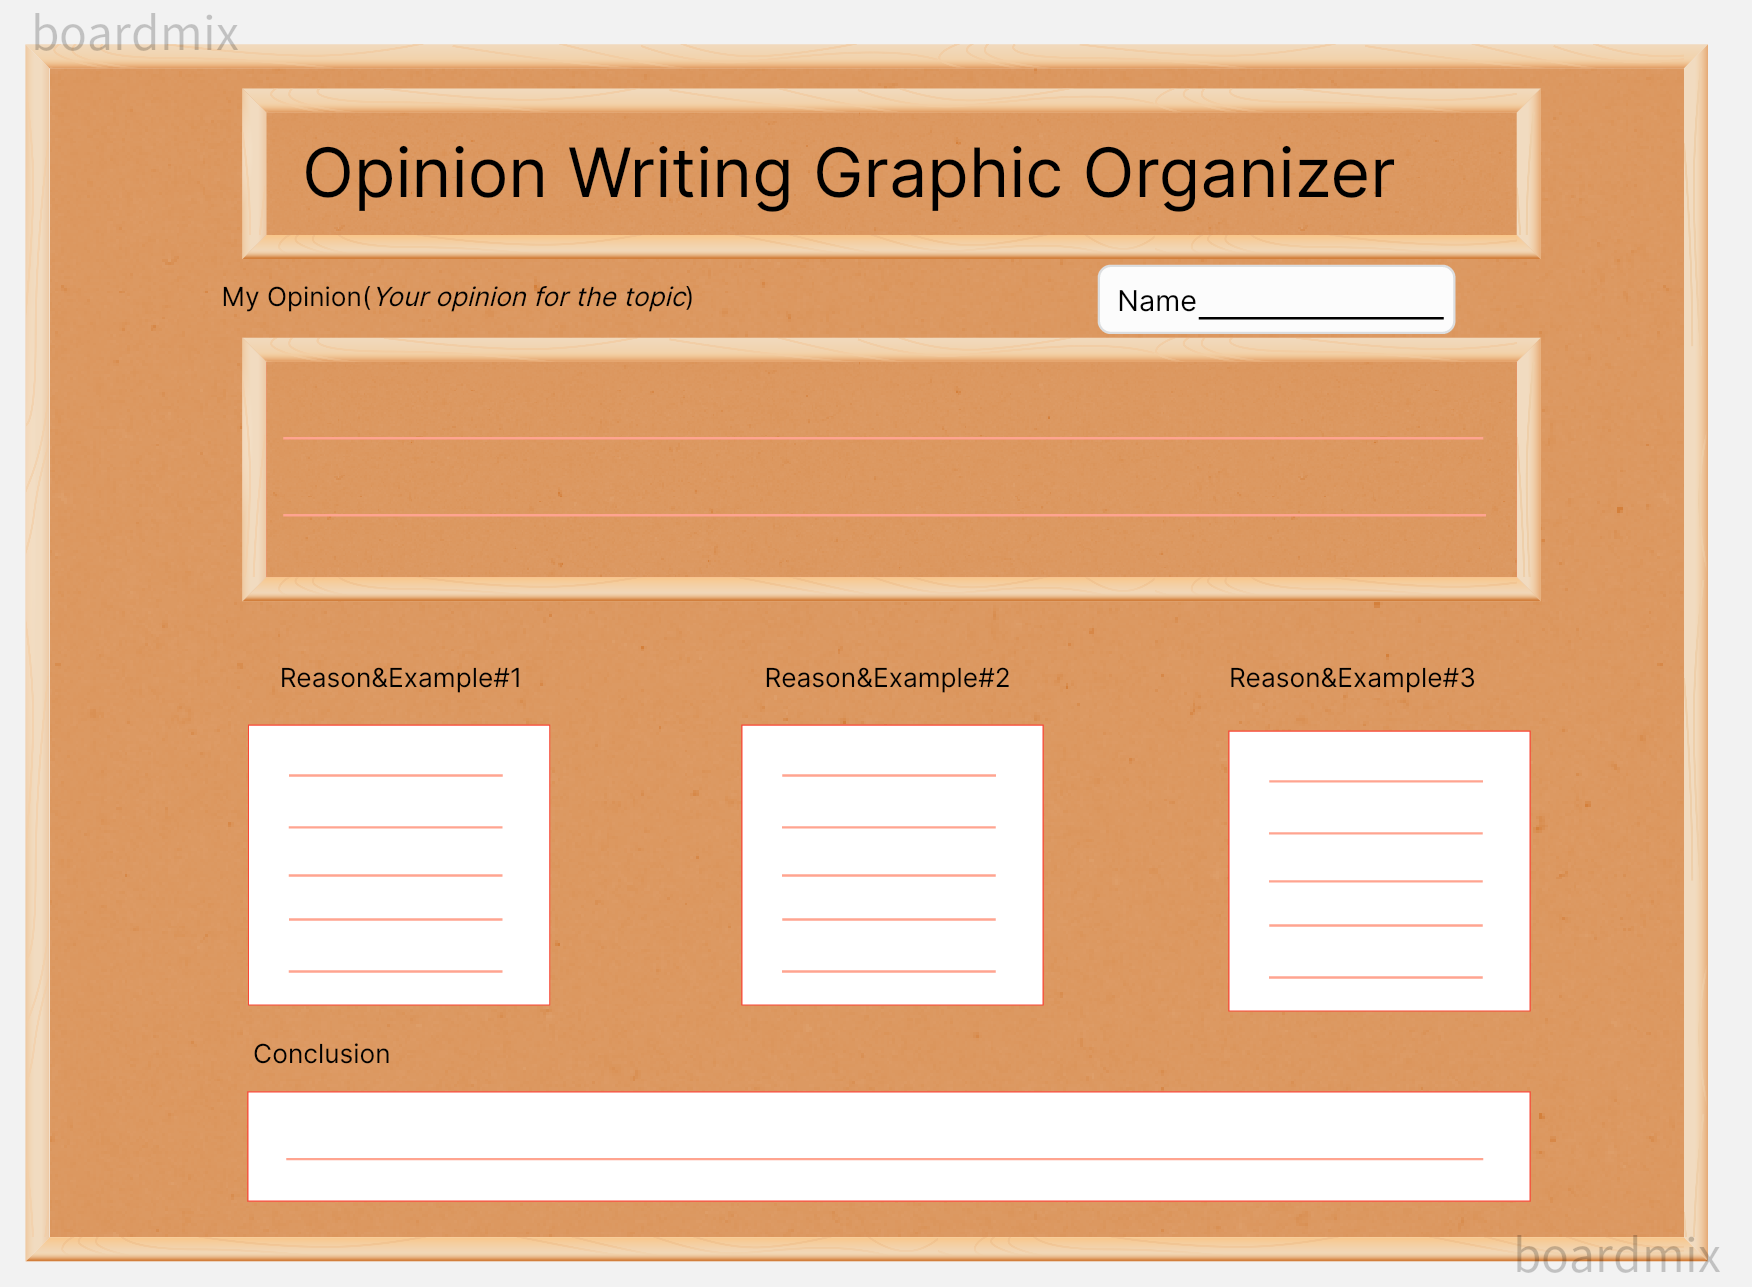 Creating Opinion Writing Graphic Organizer on Boardmix for Free